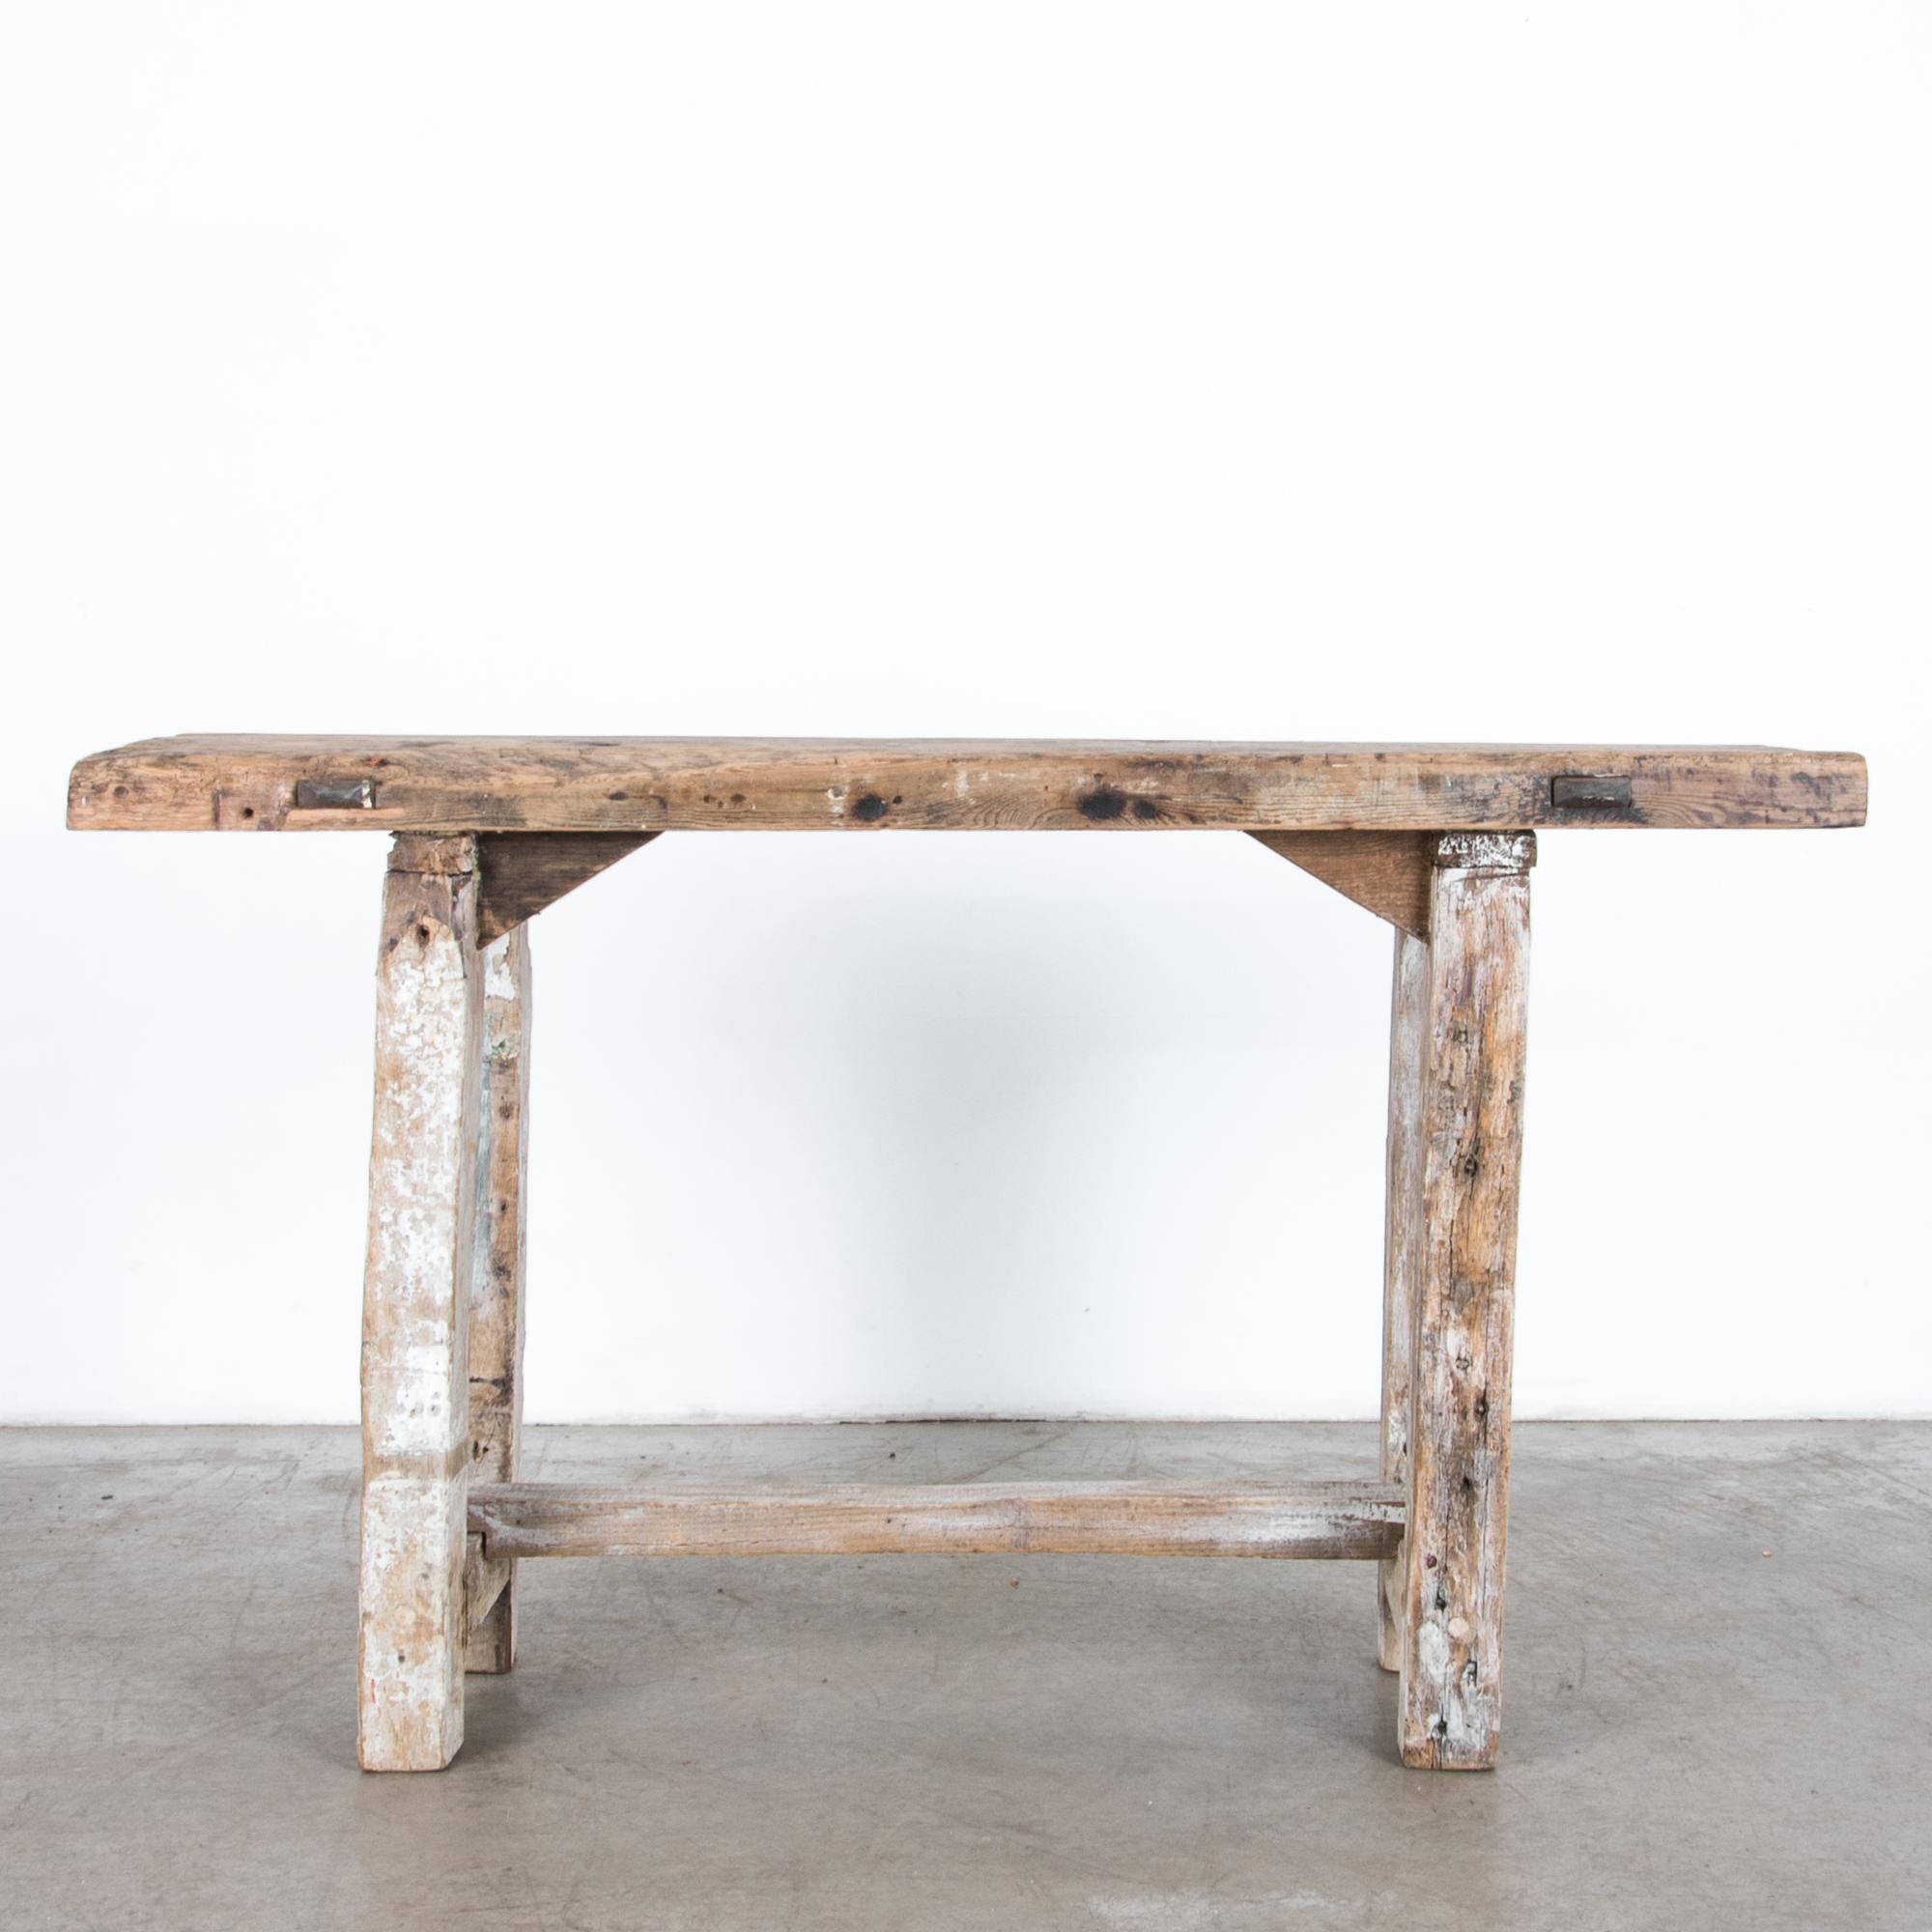 A rustic table from Belgium, circa 1900. Reinforced for heavy duty work angled braces and iron bars echo stability with a visual effect. With textured marks from years of use, this antique furniture piece has a striking effect, with natural tones